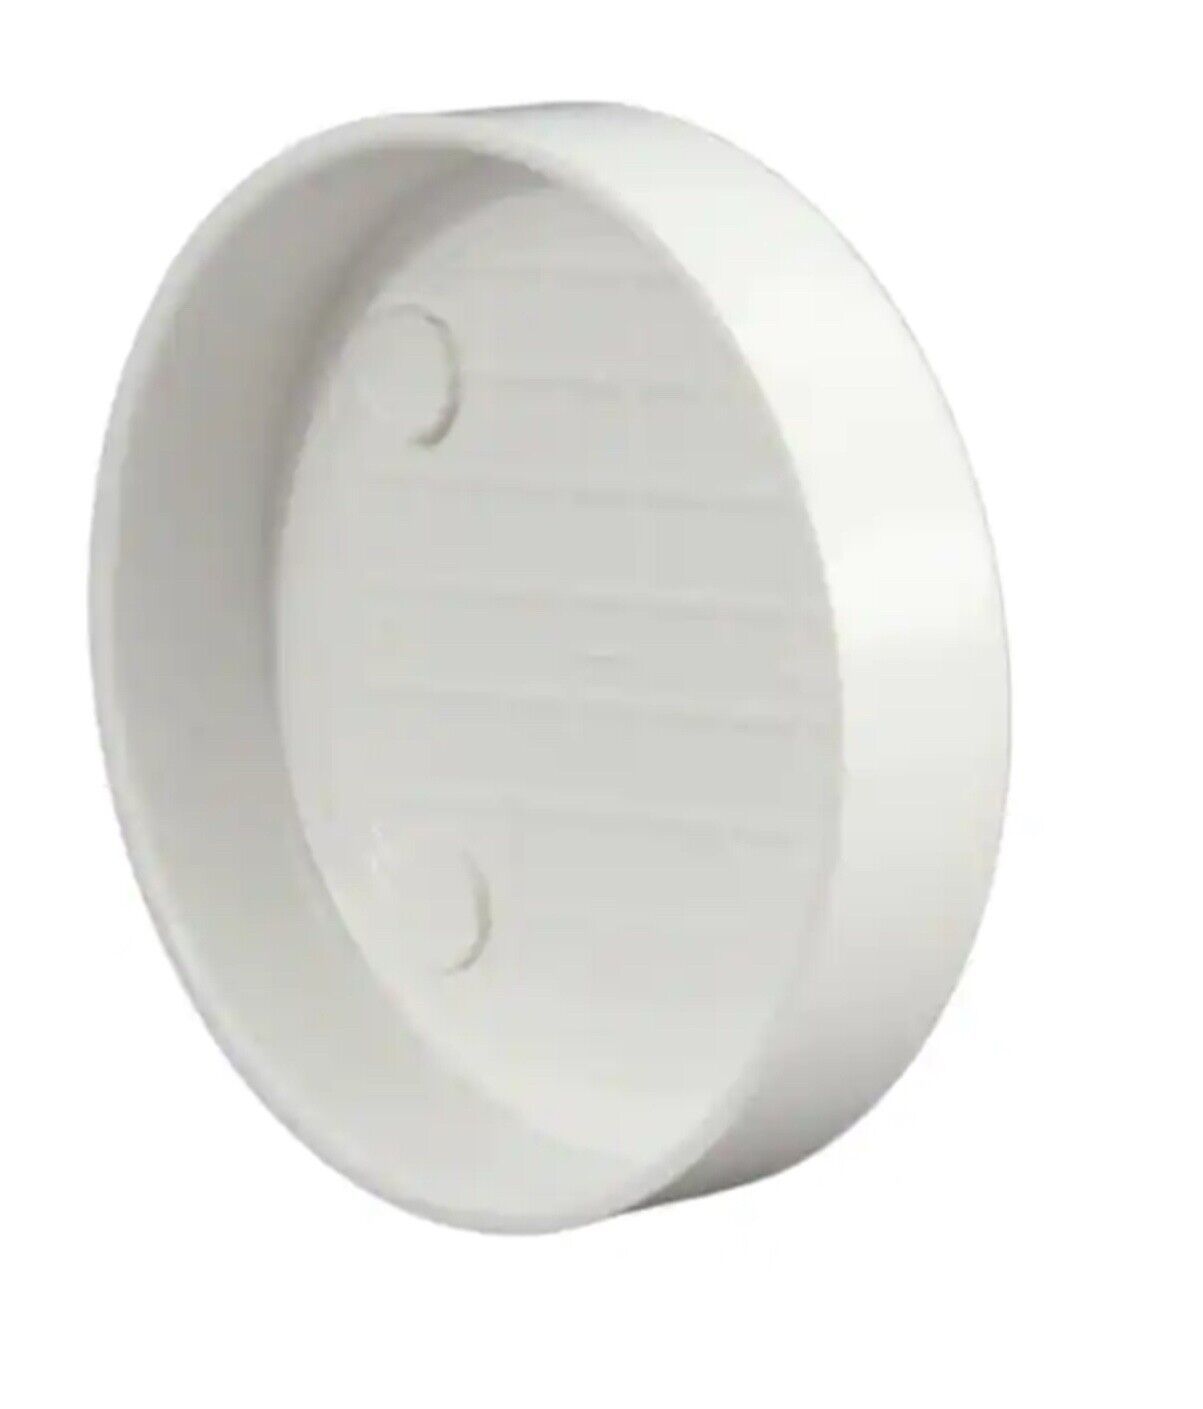 Primary image for Charlotte 2” OD PVC Test Cap Fitting